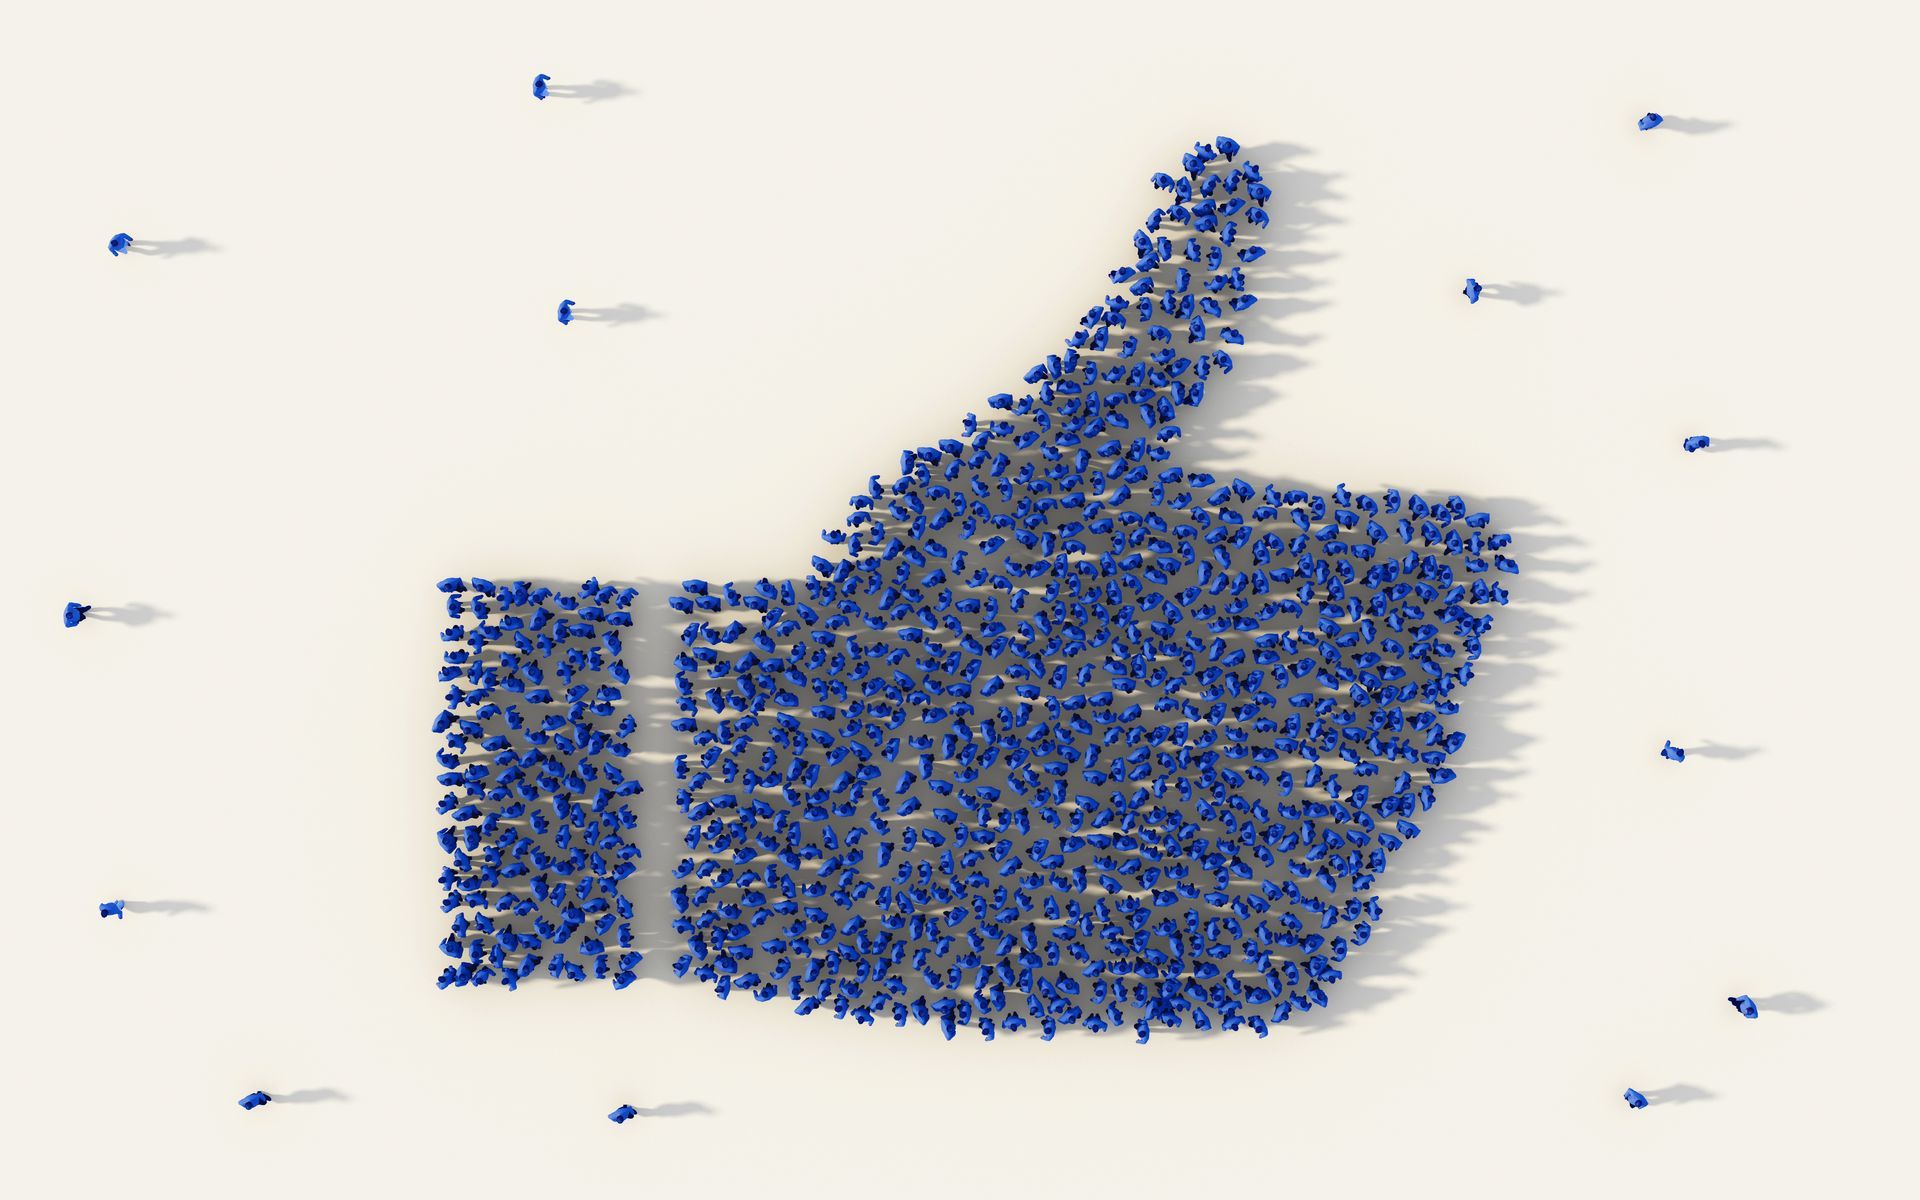 A group of people stand to form a Facebook 'Like' thumbs up, but some stand at a distance, excluded.